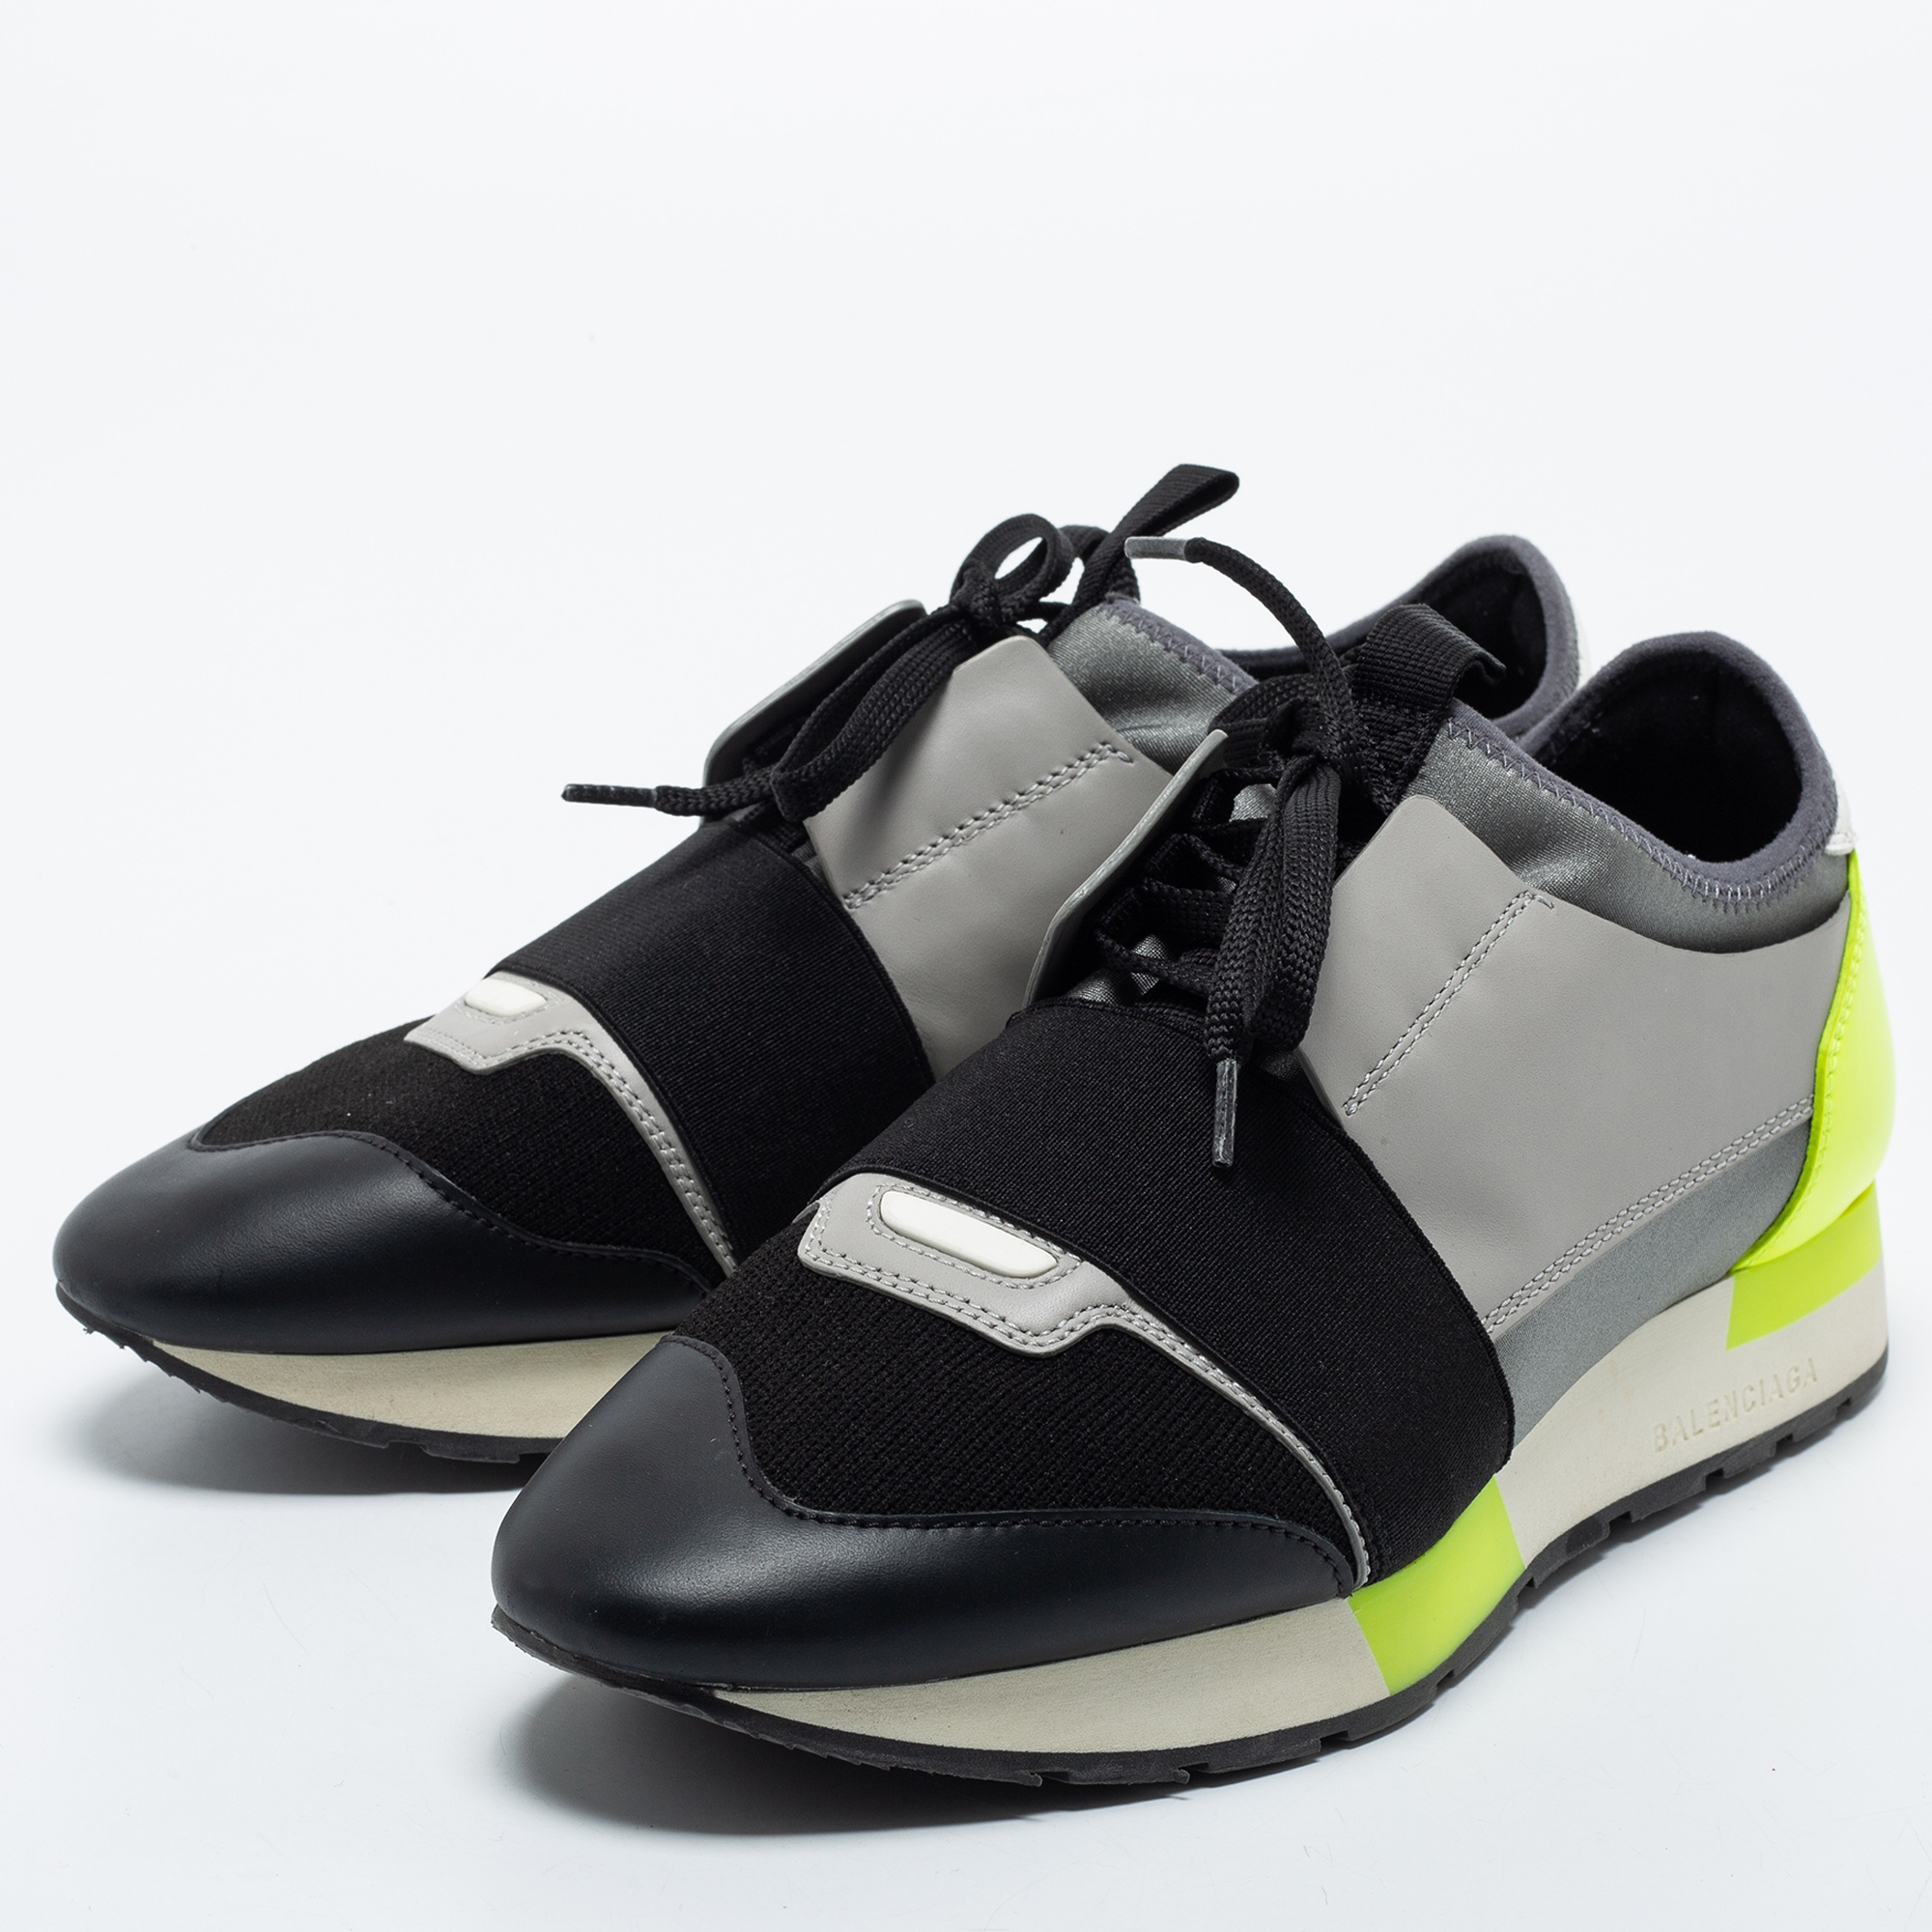 

Balenciaga Tricolor Leather, Mesh and Neoprene Race Runner Sneakers Size, Black